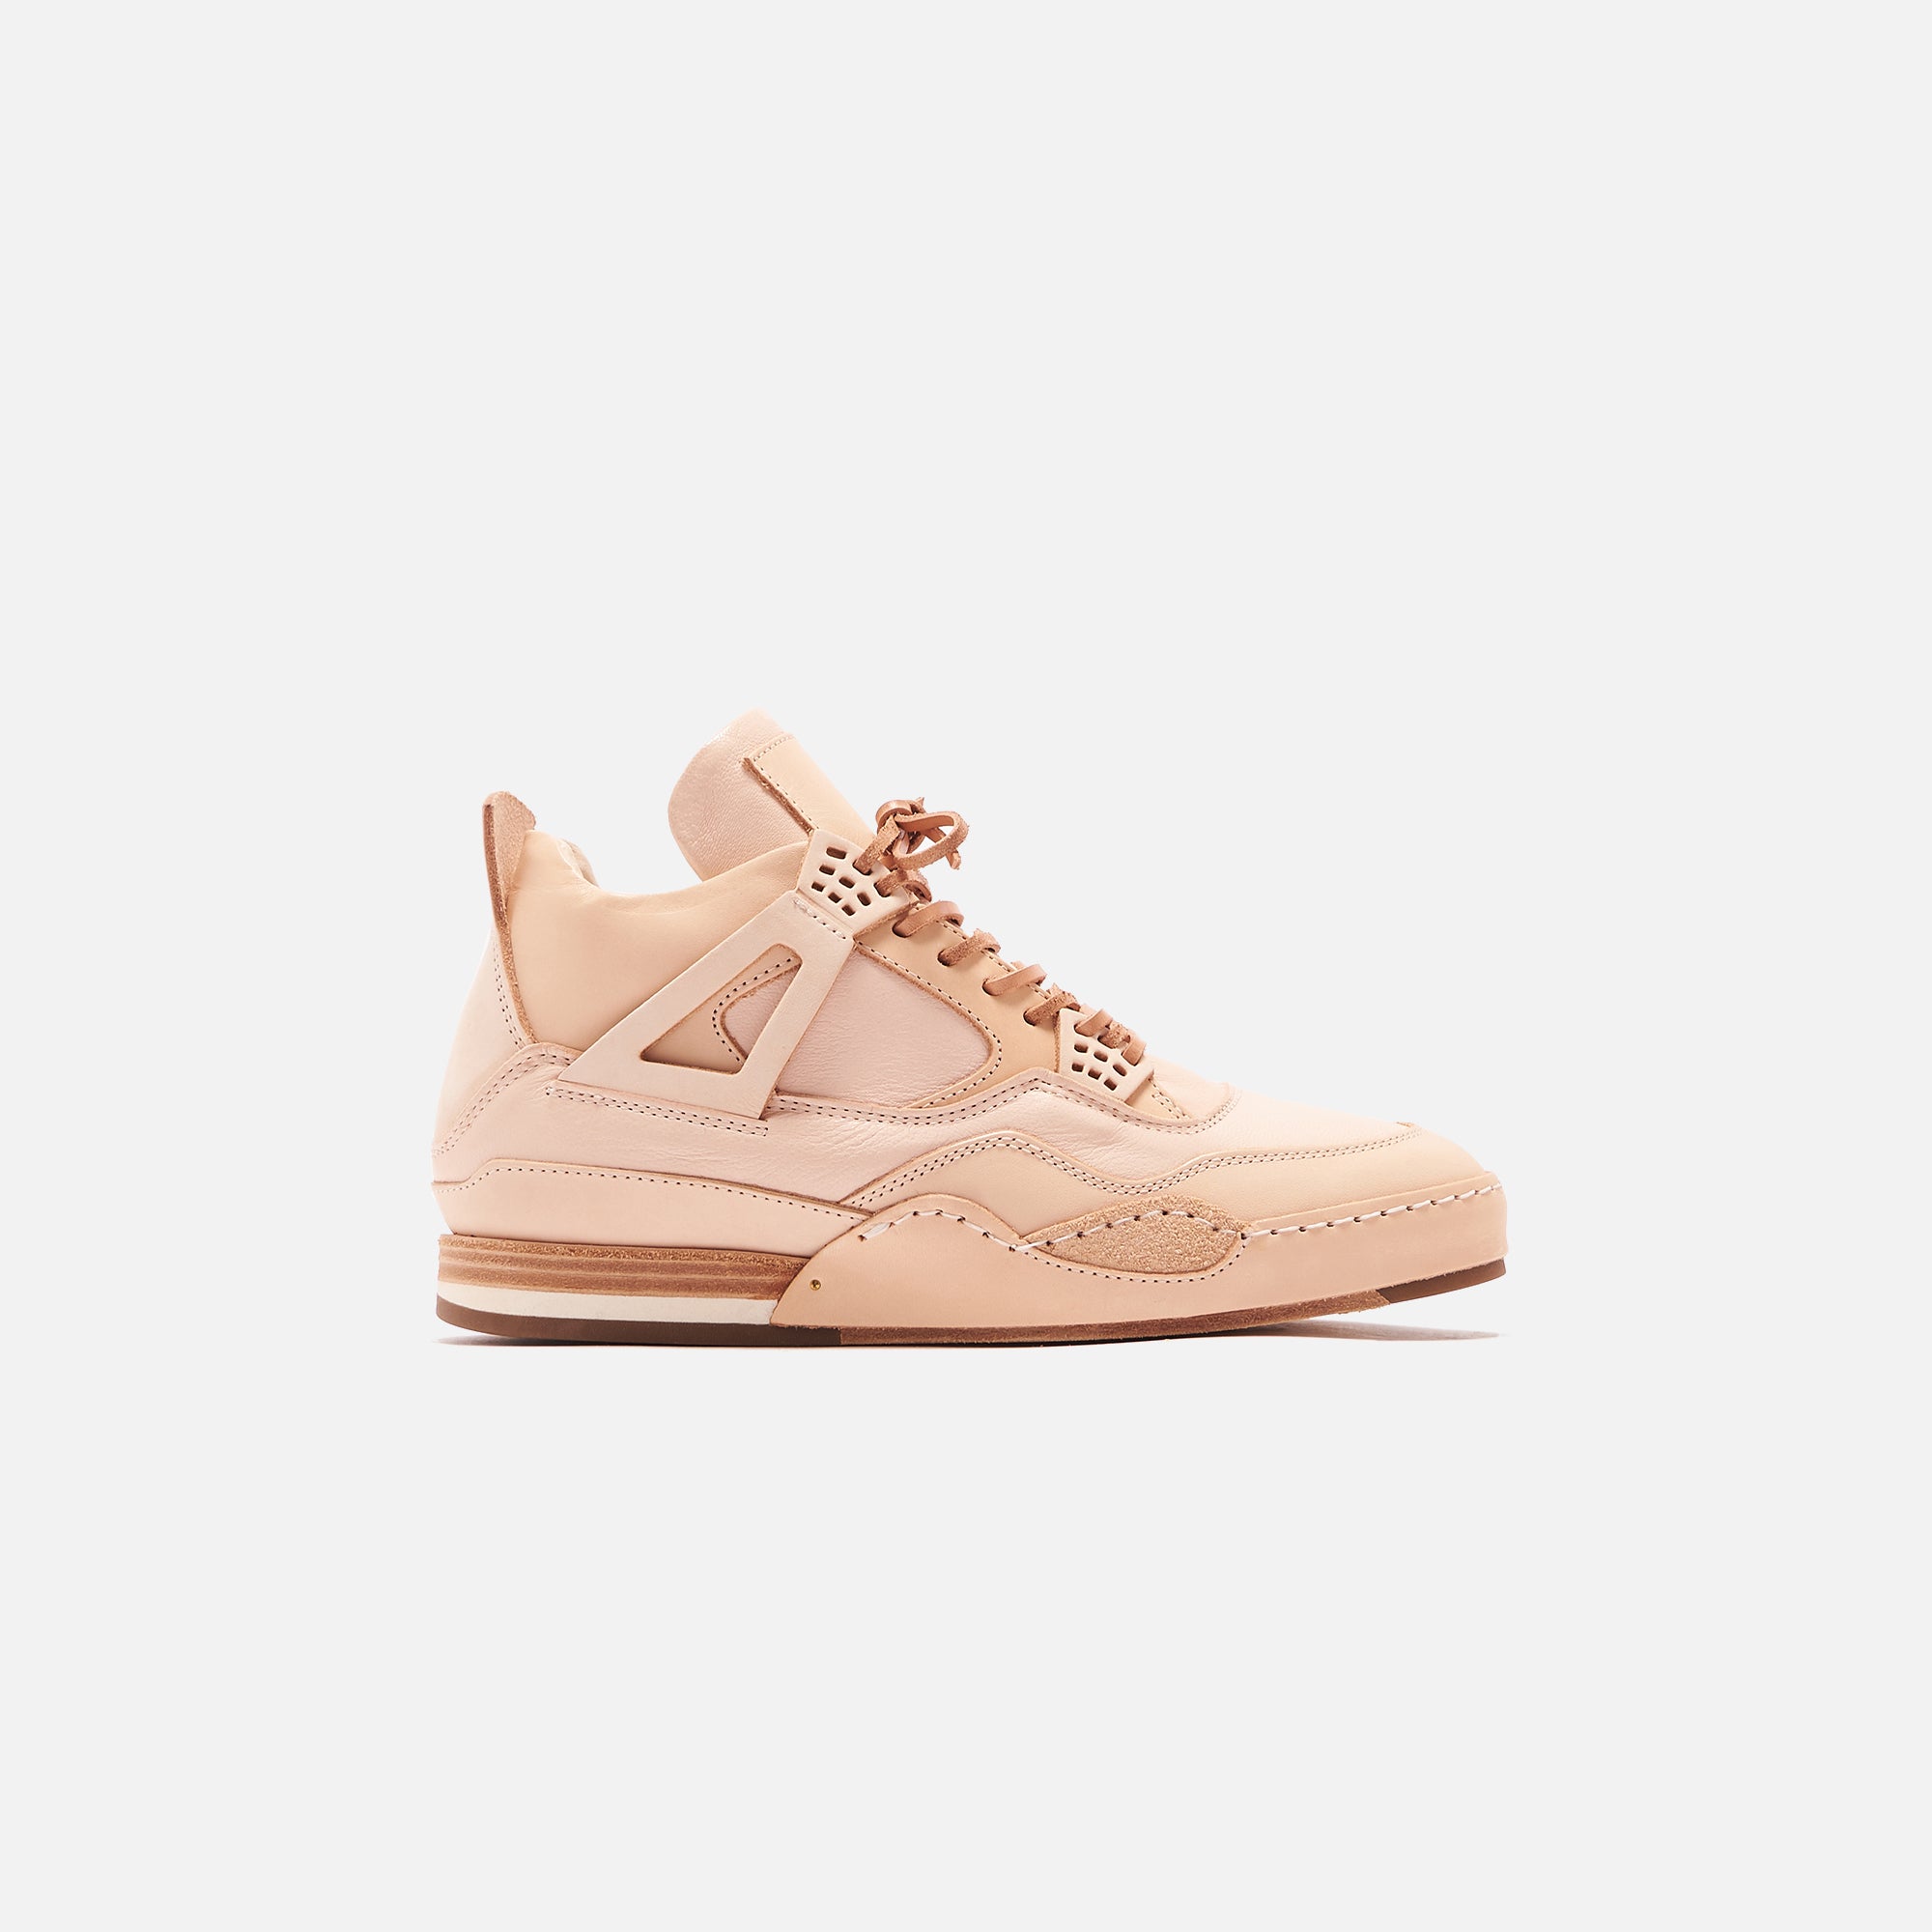 Hender Scheme Manual Industrial Products 10 - Natural – Kith Europe